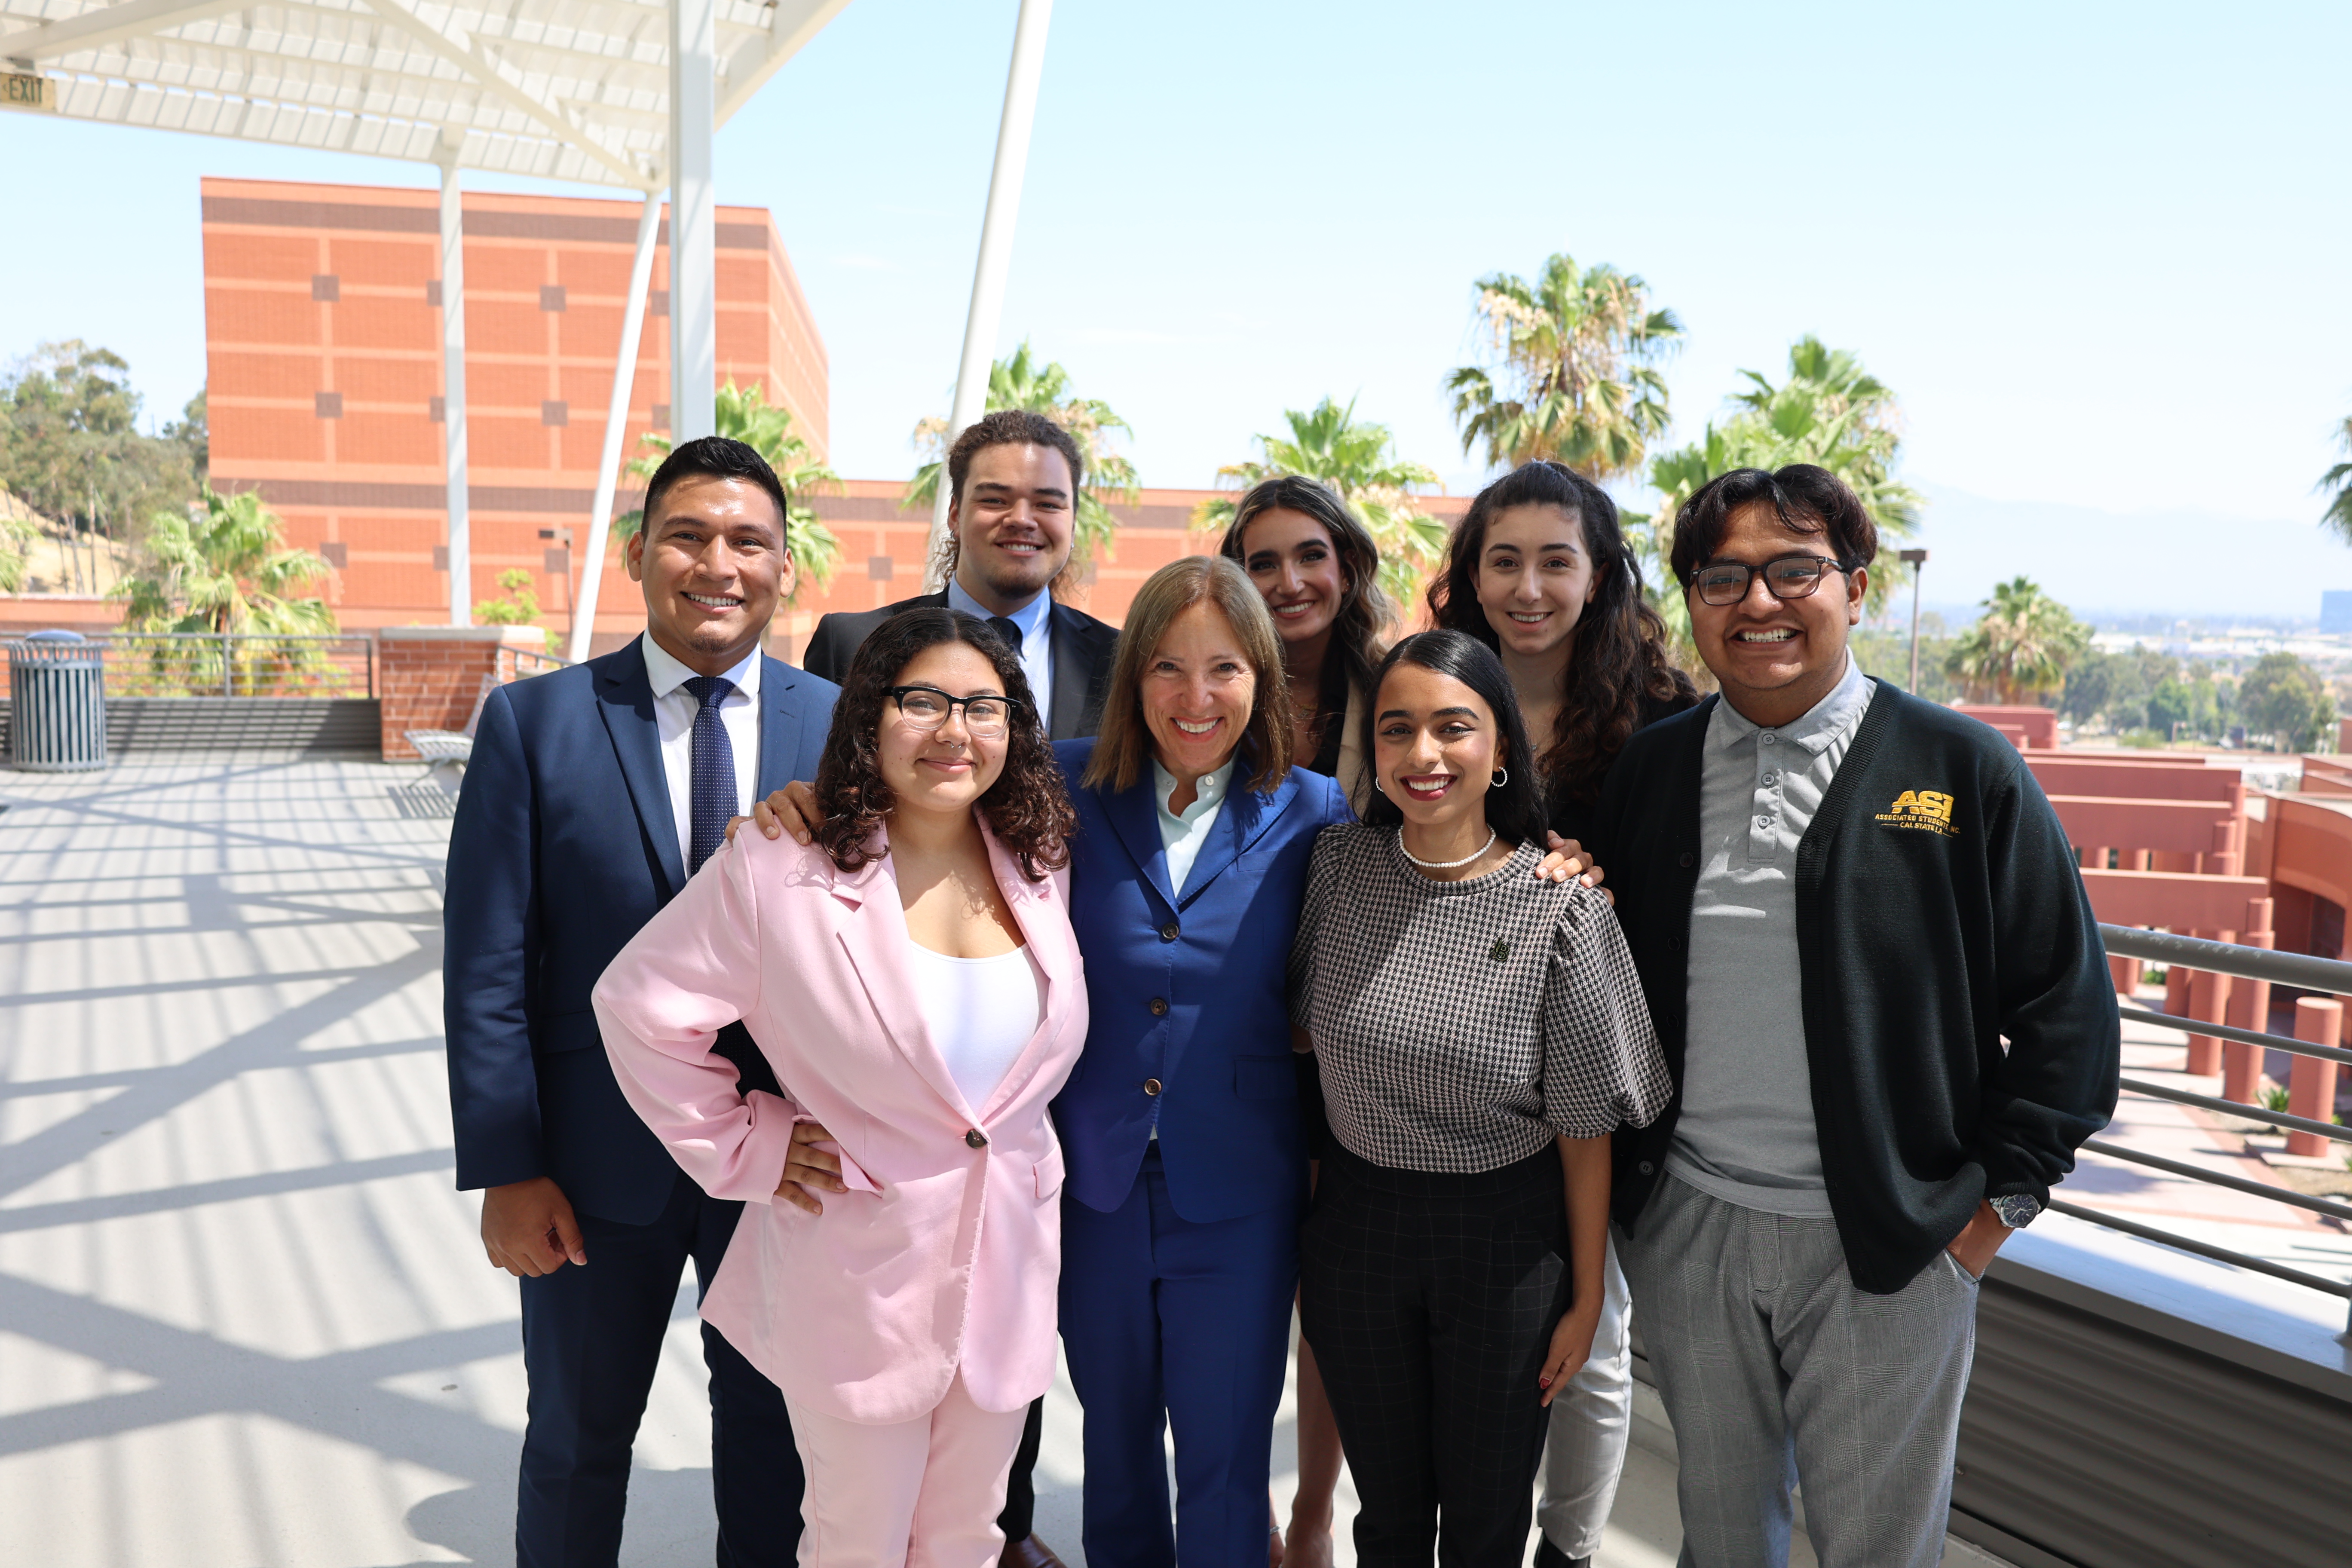 Image of Lt. Governor Kounalakis with students at Cal State LA